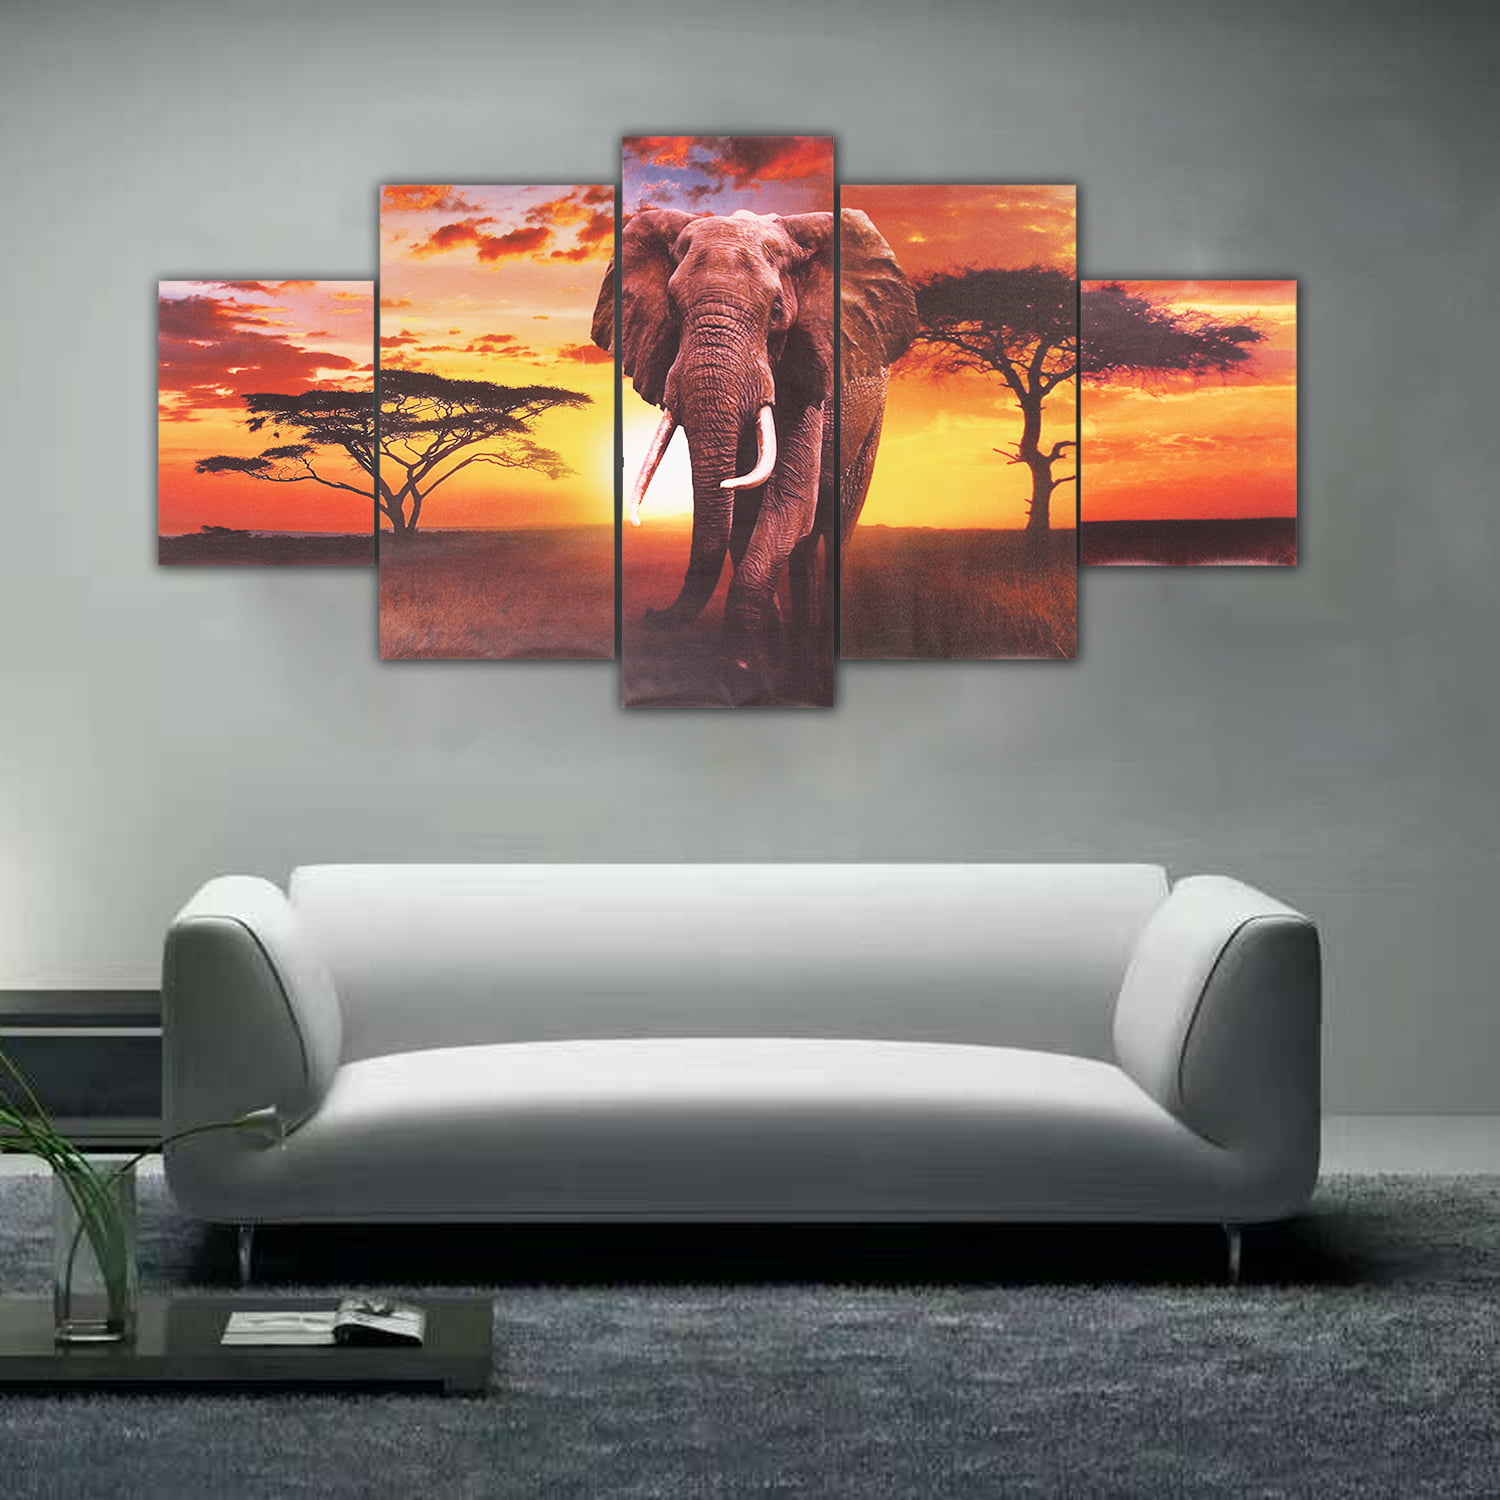 5pcs Unframed Art Oil Sunset Painting Print Canvas Picture Home Wall Room Deco